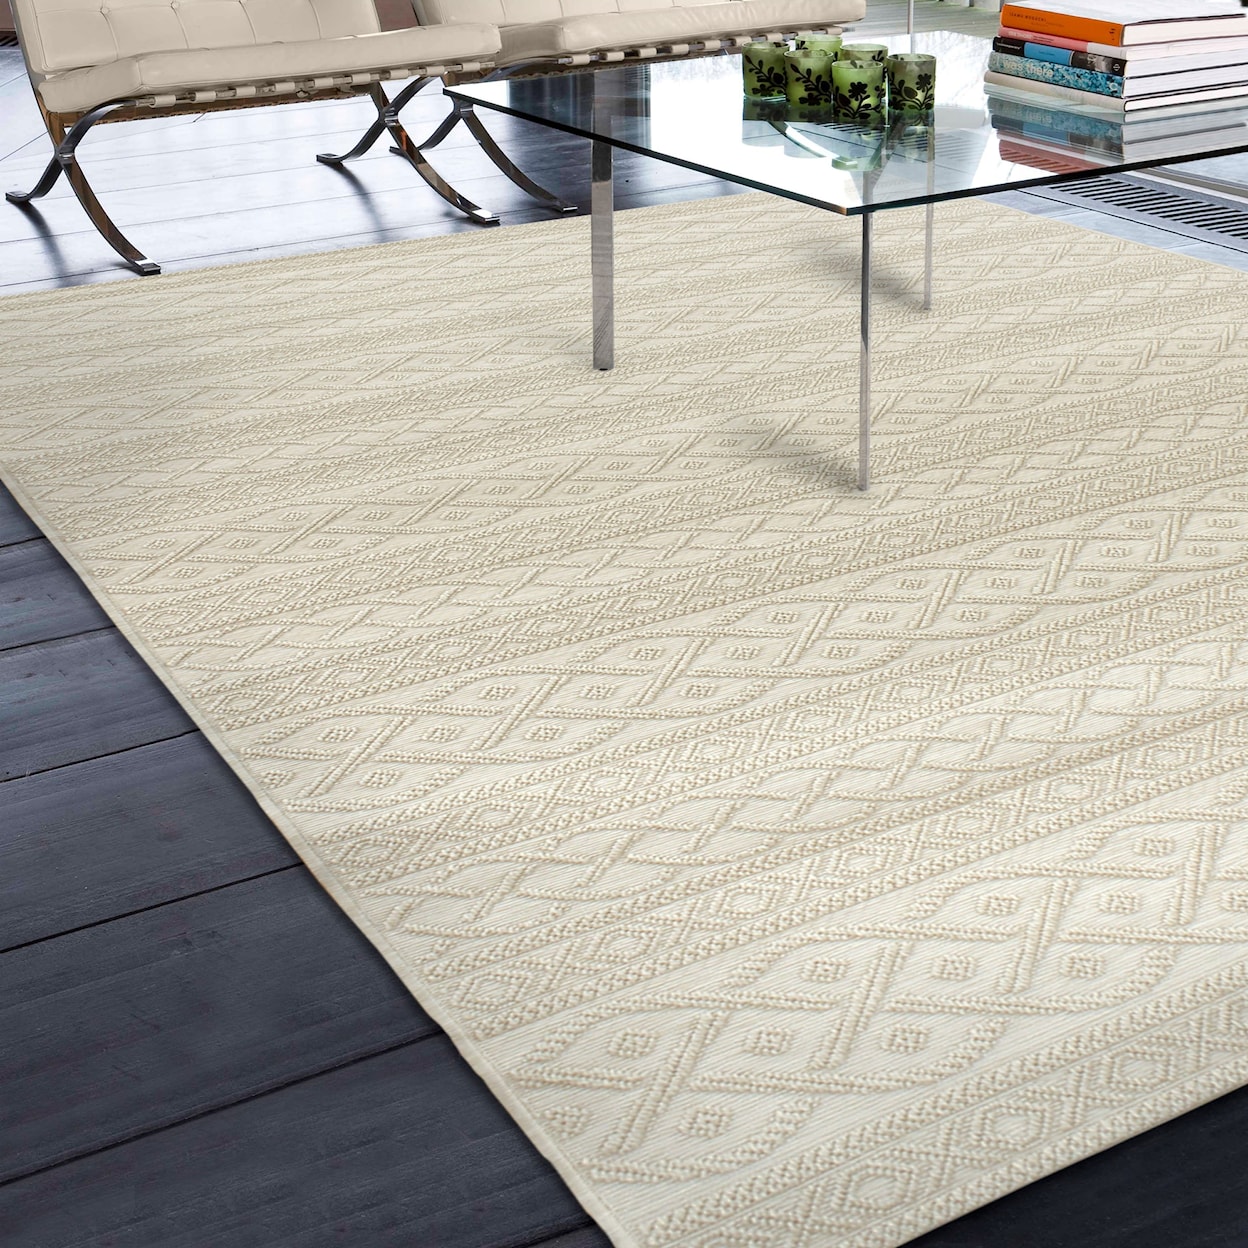 Orian Rugs Jersey Home Organic Cable ivory 7'7" x 10'10" Rug